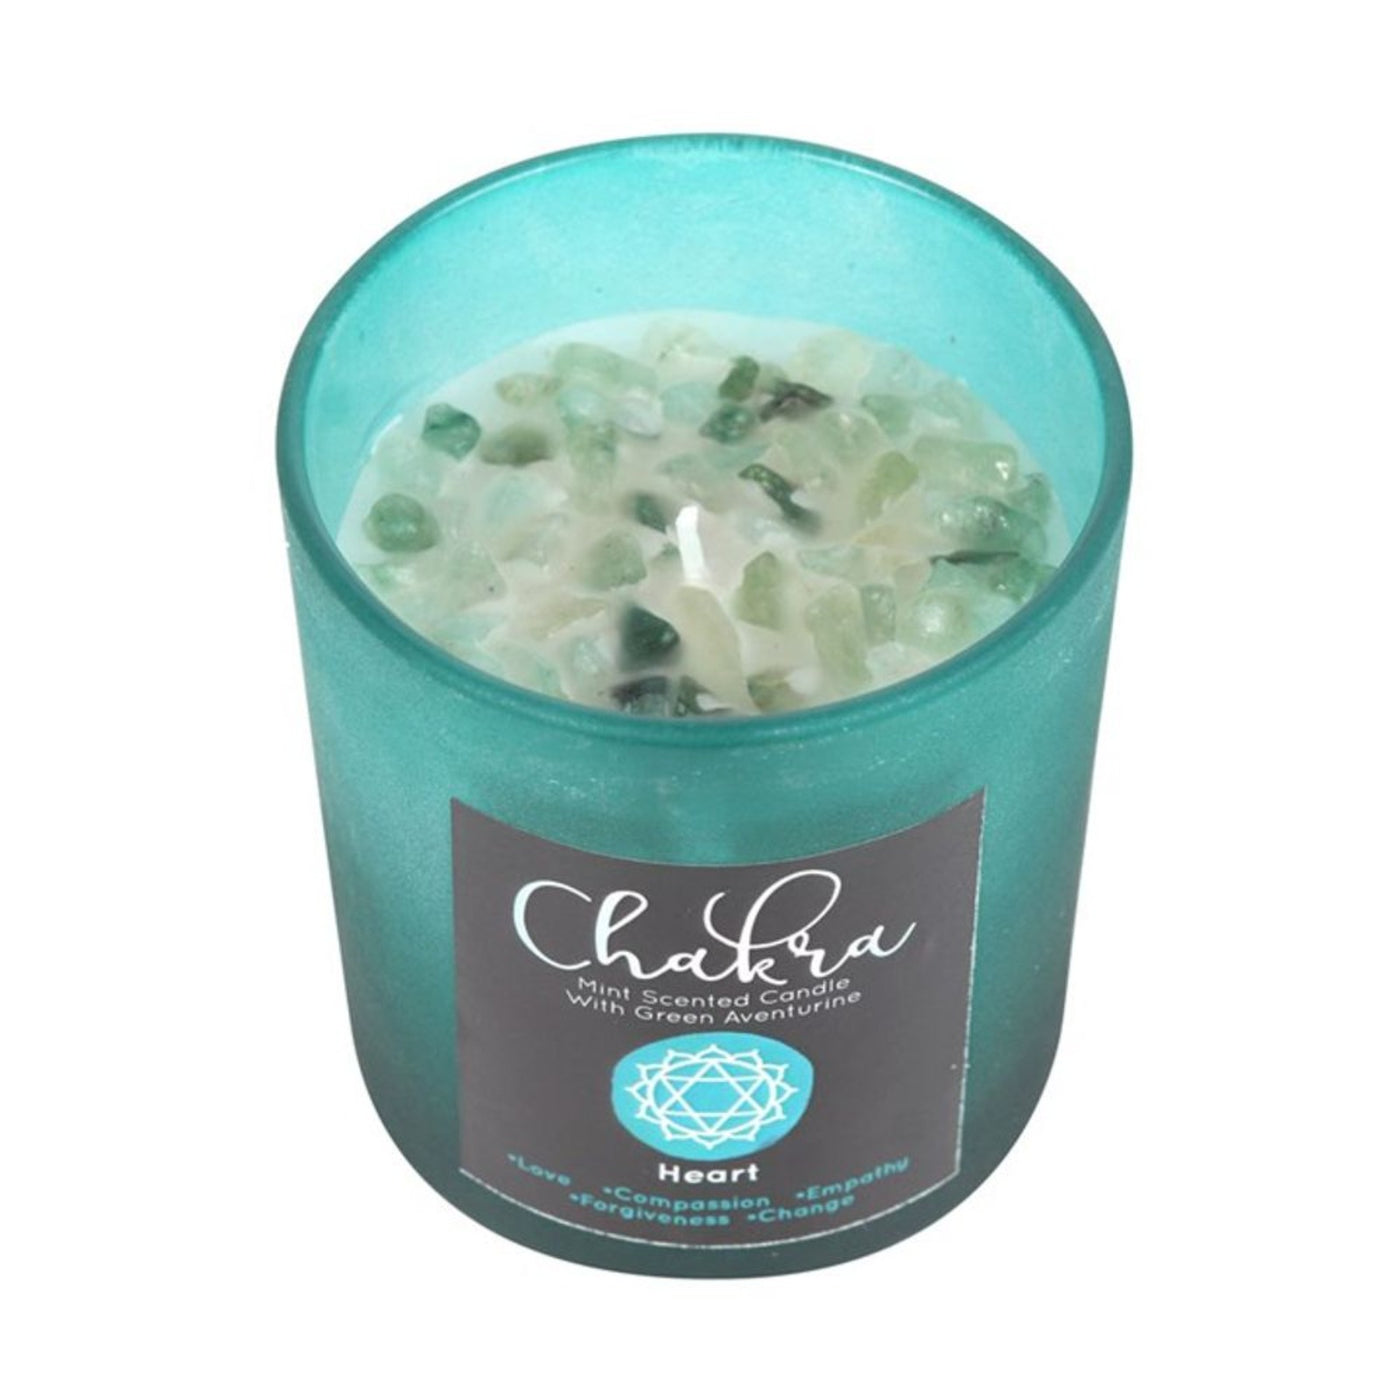 Heart Chakra Mint Green Aventurine Crystal Chip Candle In Glass Jar.